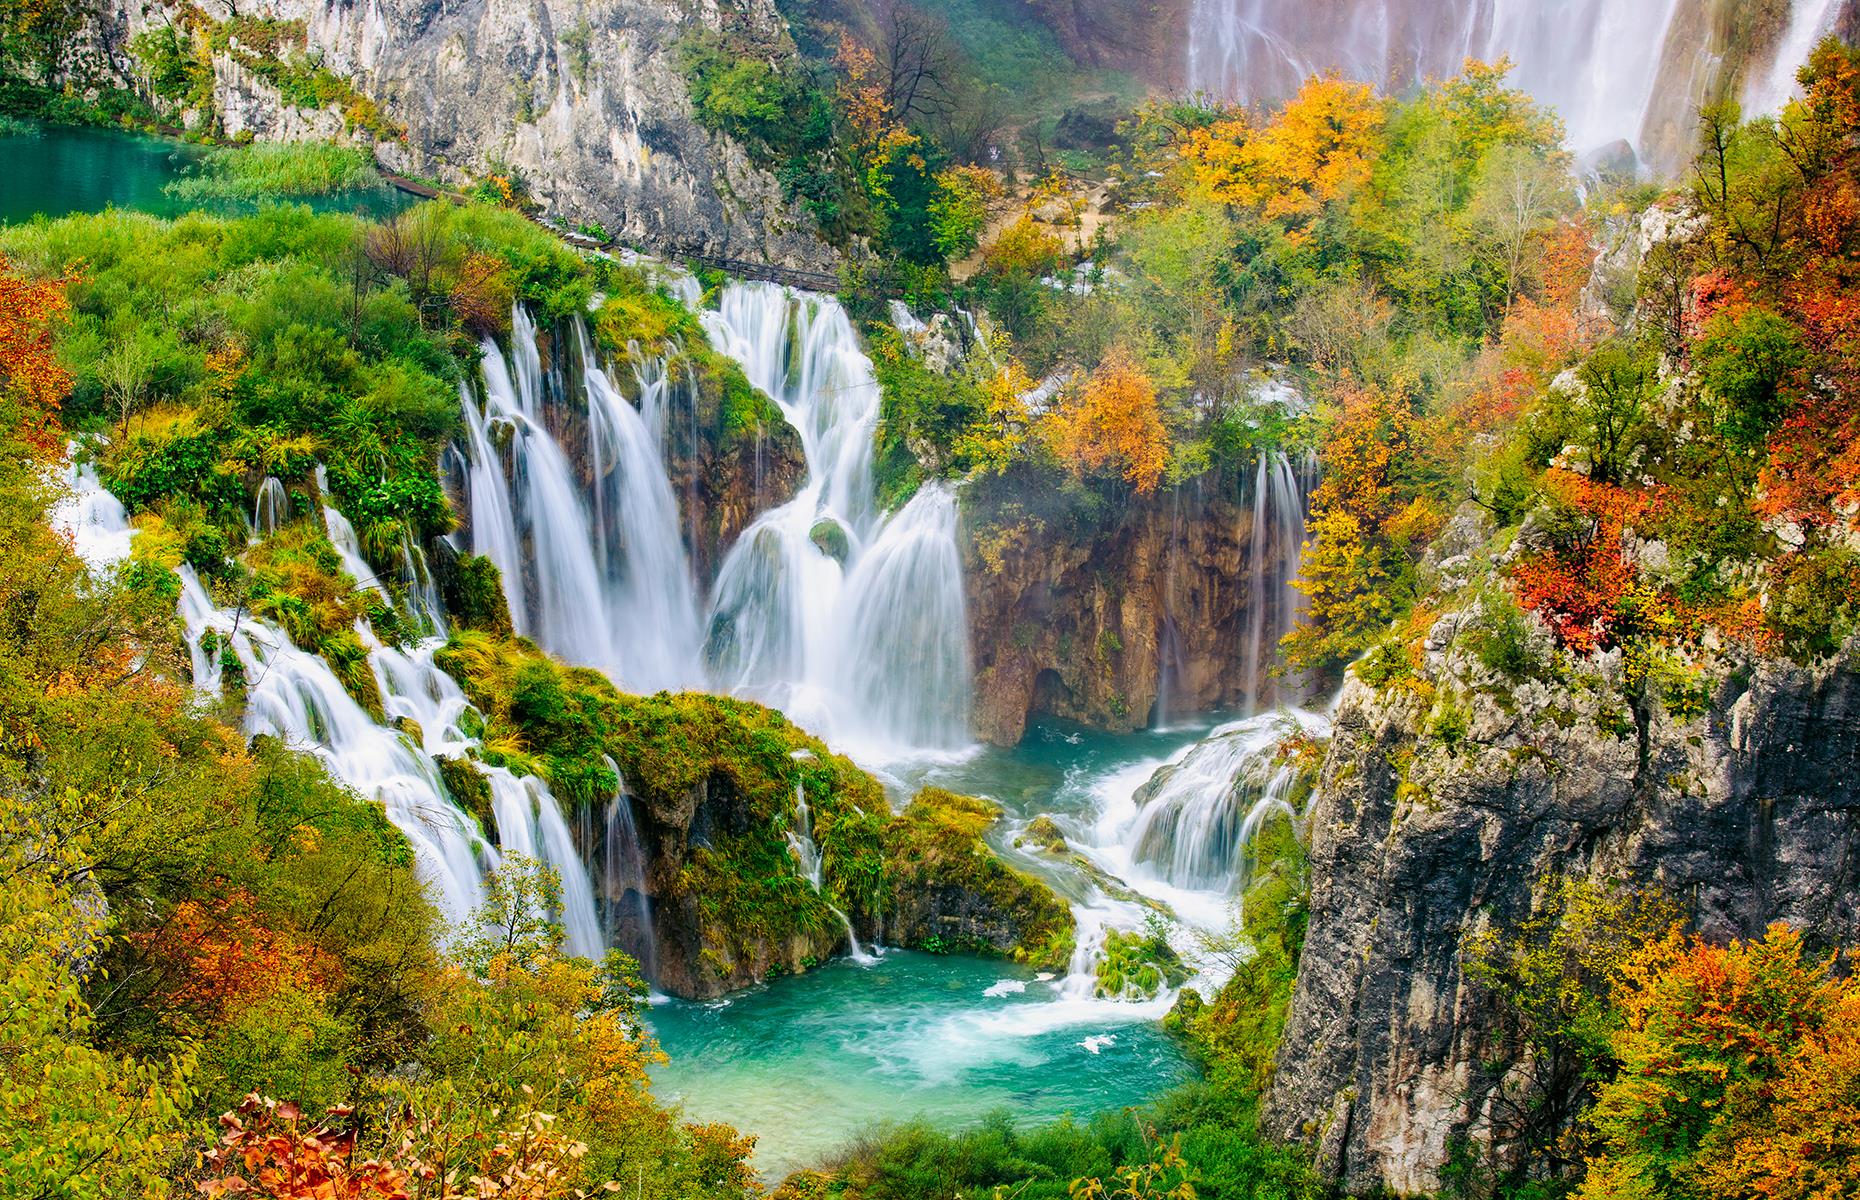 <p>Covering almost 115 square miles, Plitvice Lakes National Park is found near the Bosnia and Herzegovina border, two hours south by car from Zagreb in Croatia. The park, founded in 1949, is famous for its collection of 16 crystal clear, color-changing lakes – they morph between shades of green and blue due to their high mineral content – plus over 90 waterfalls. It's a truly magical landscape. Here are <a href="https://www.loveexploring.com/galleries/87970/stunning-pictures-of-europes-best-national-parks?page=1">stunning pictures of Europe's best national parks</a>.</p>